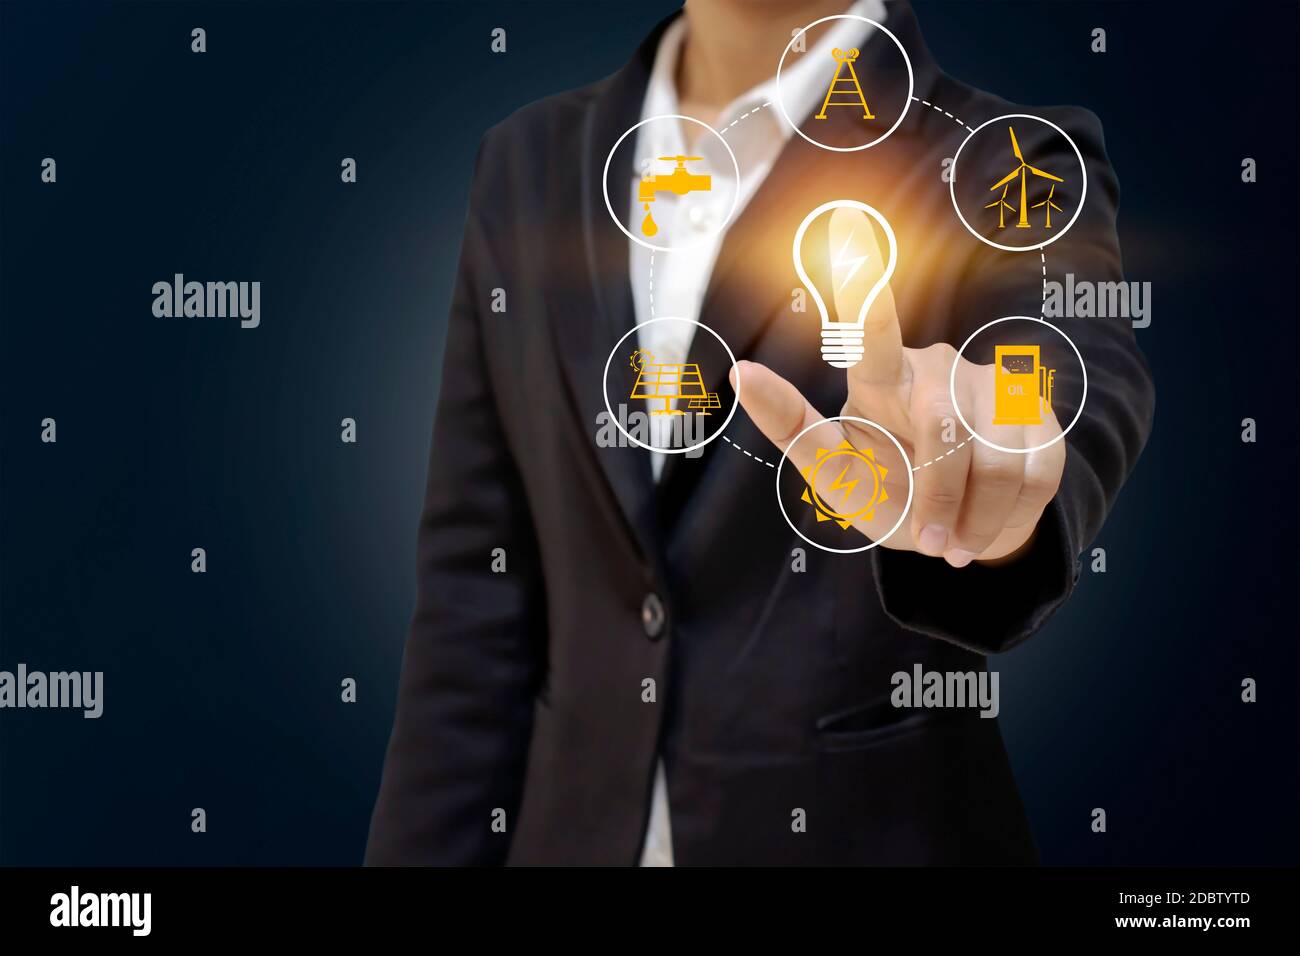 Business people holding energy-saving lamps. The work includes environmentally friendly energy source icons, energy saving ideas, and environmentally Stock Photo